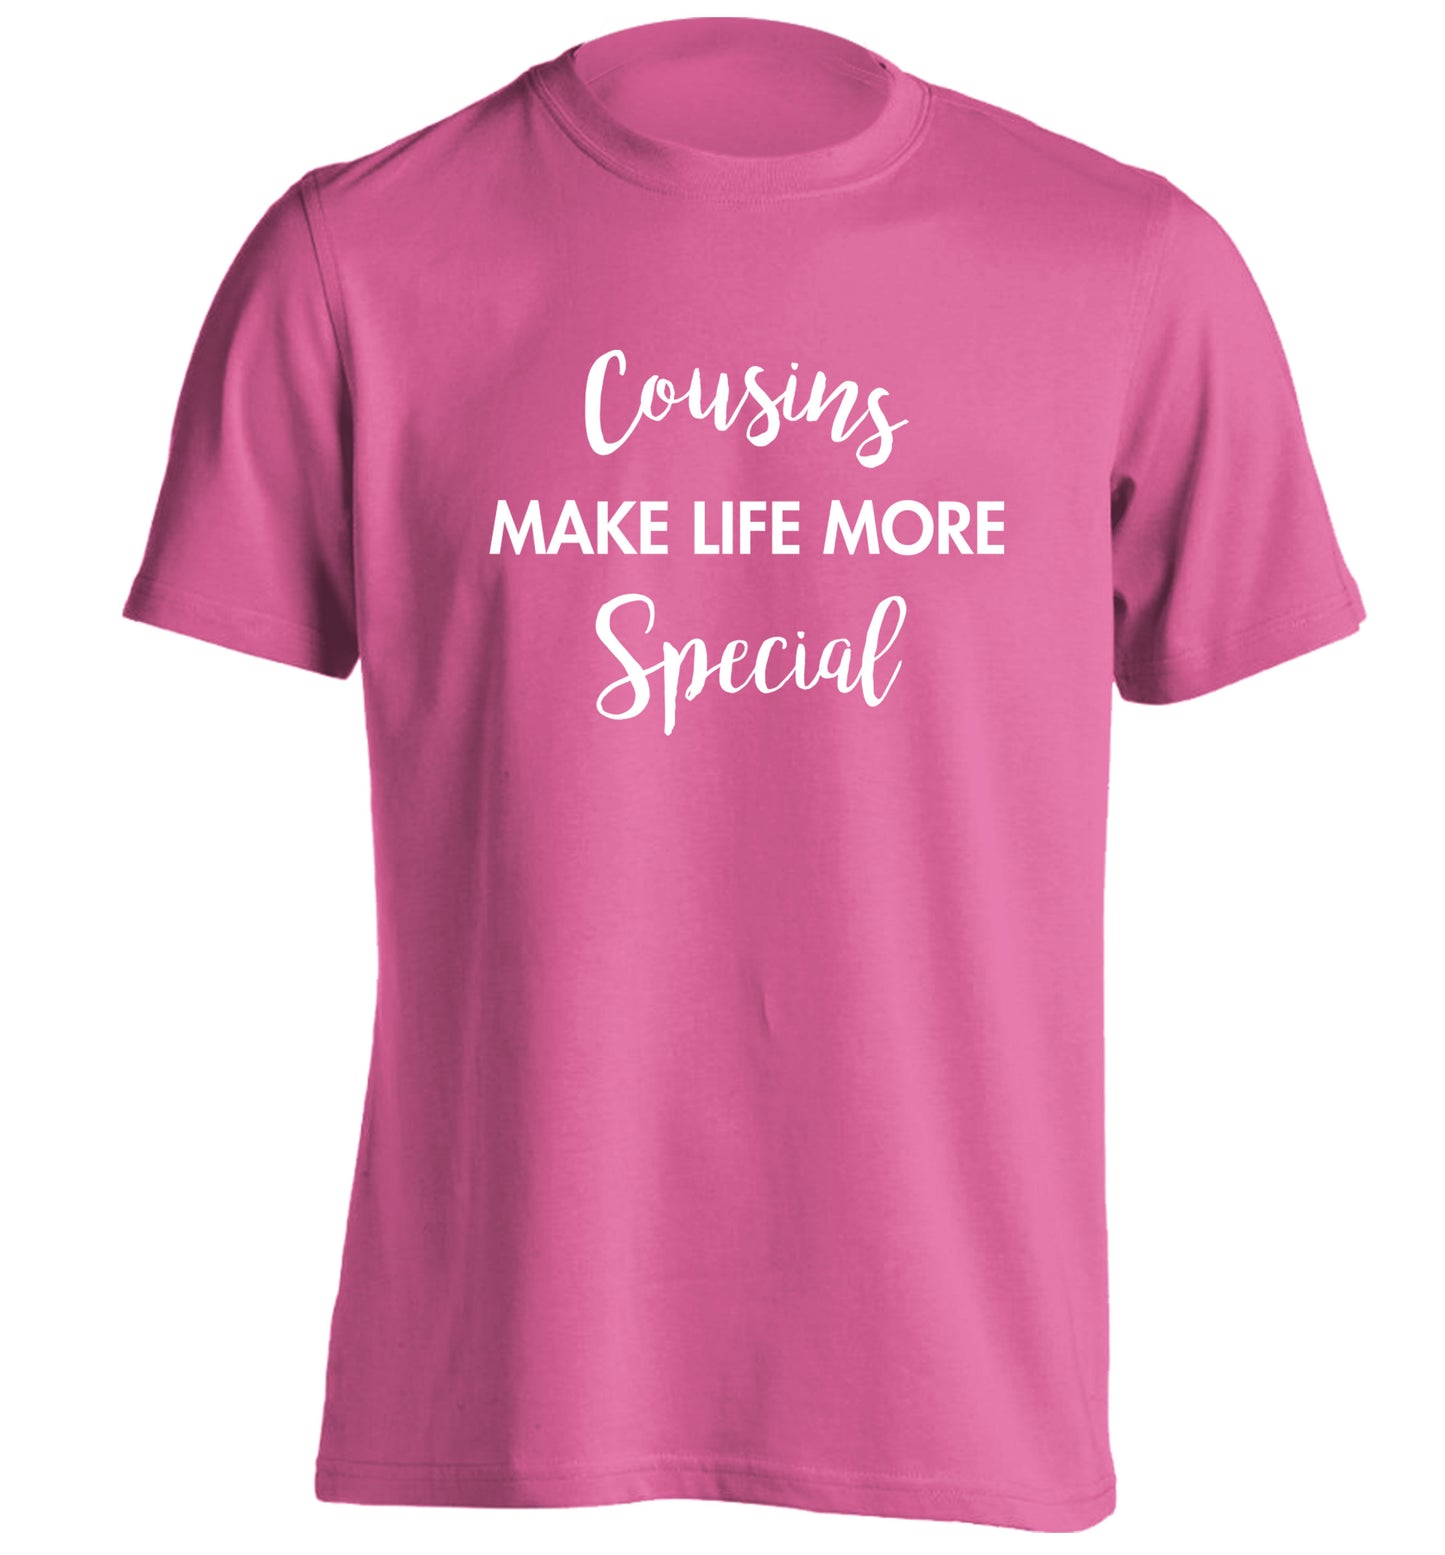 Cousins make life more special adults unisex pink Tshirt 2XL